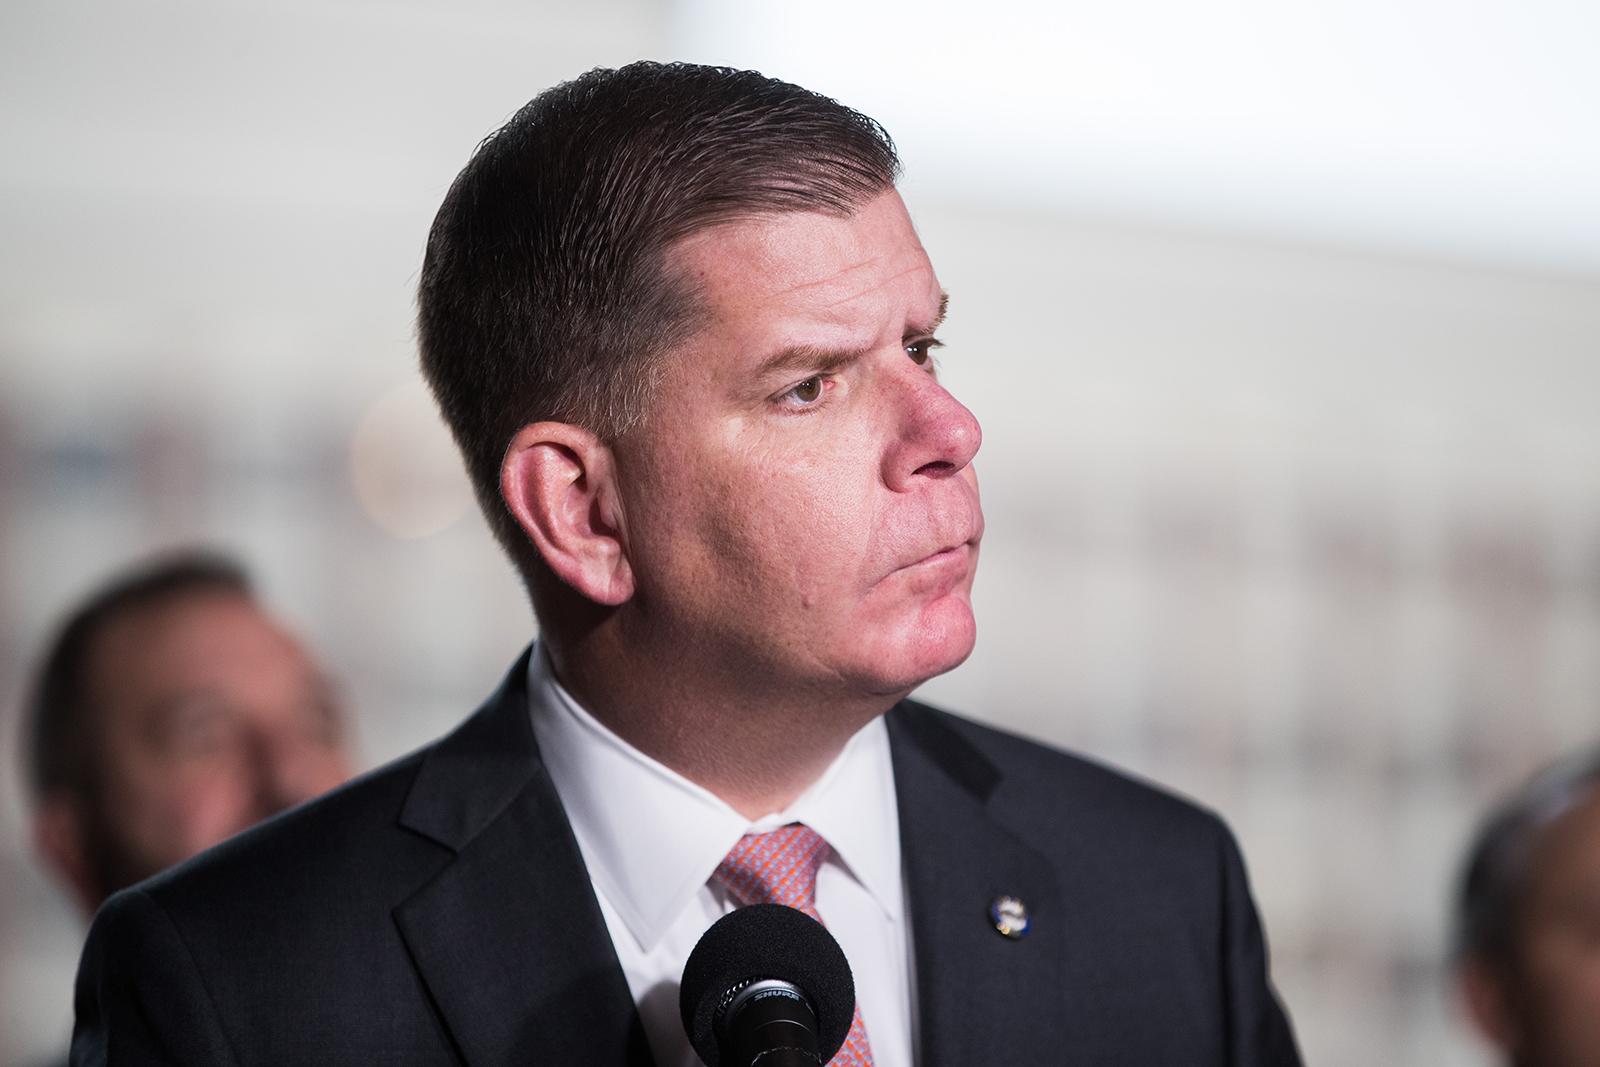 Boston Mayor Marty Walsh listens to a question at a press conference on March 13, 2020 in Boston, Massachusetts.